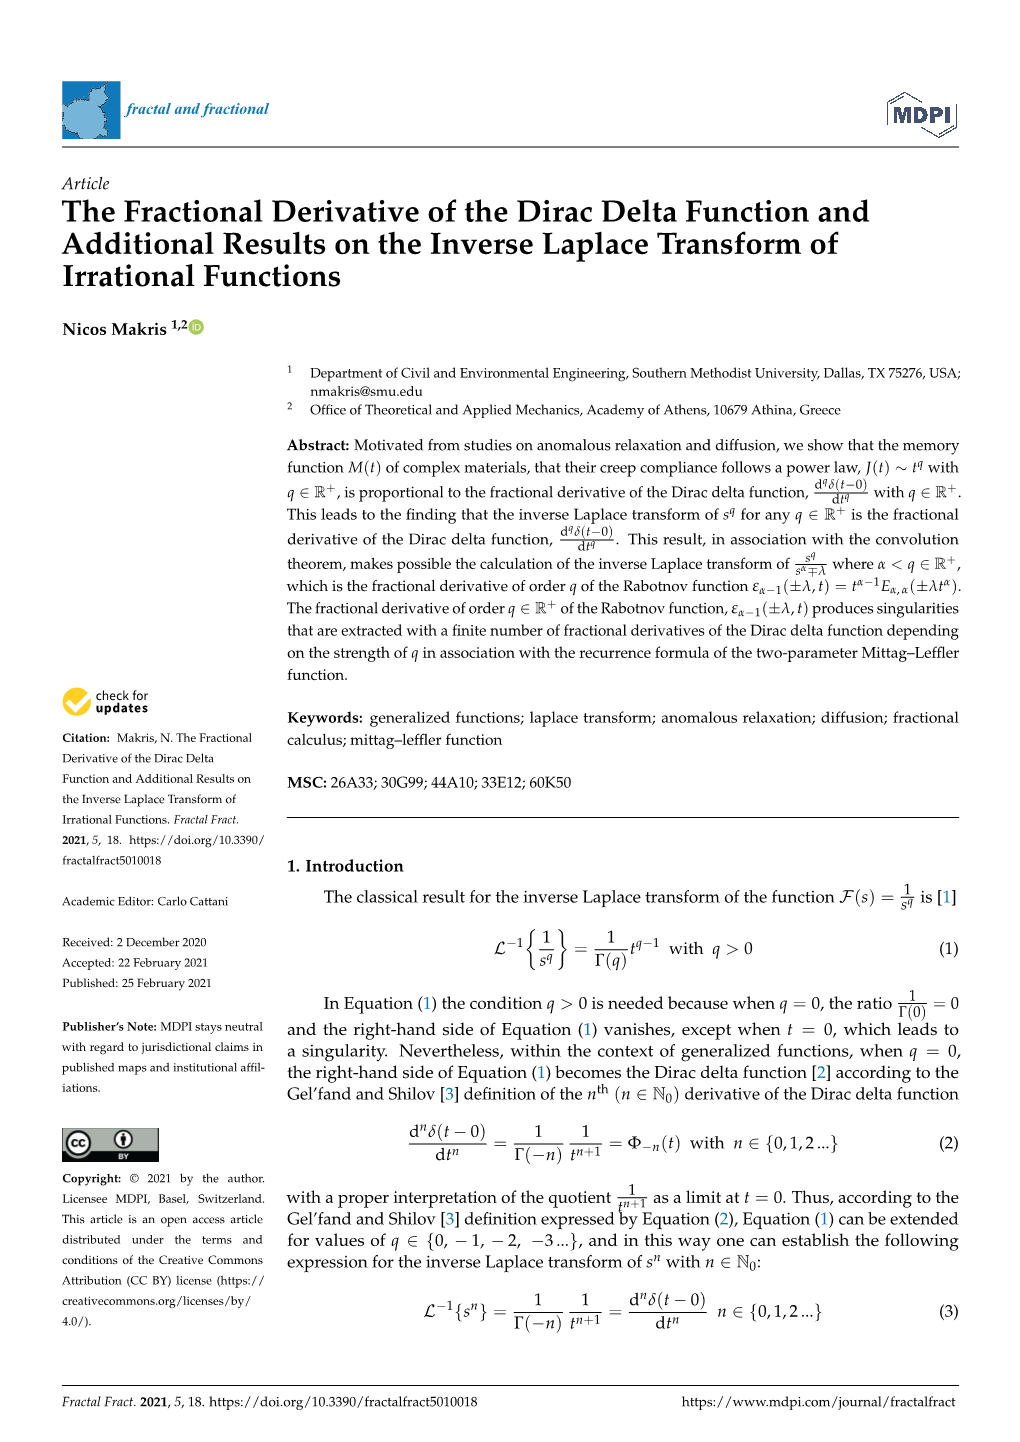 The Fractional Derivative of the Dirac Delta Function and Additional Results on the Inverse Laplace Transform of Irrational Functions